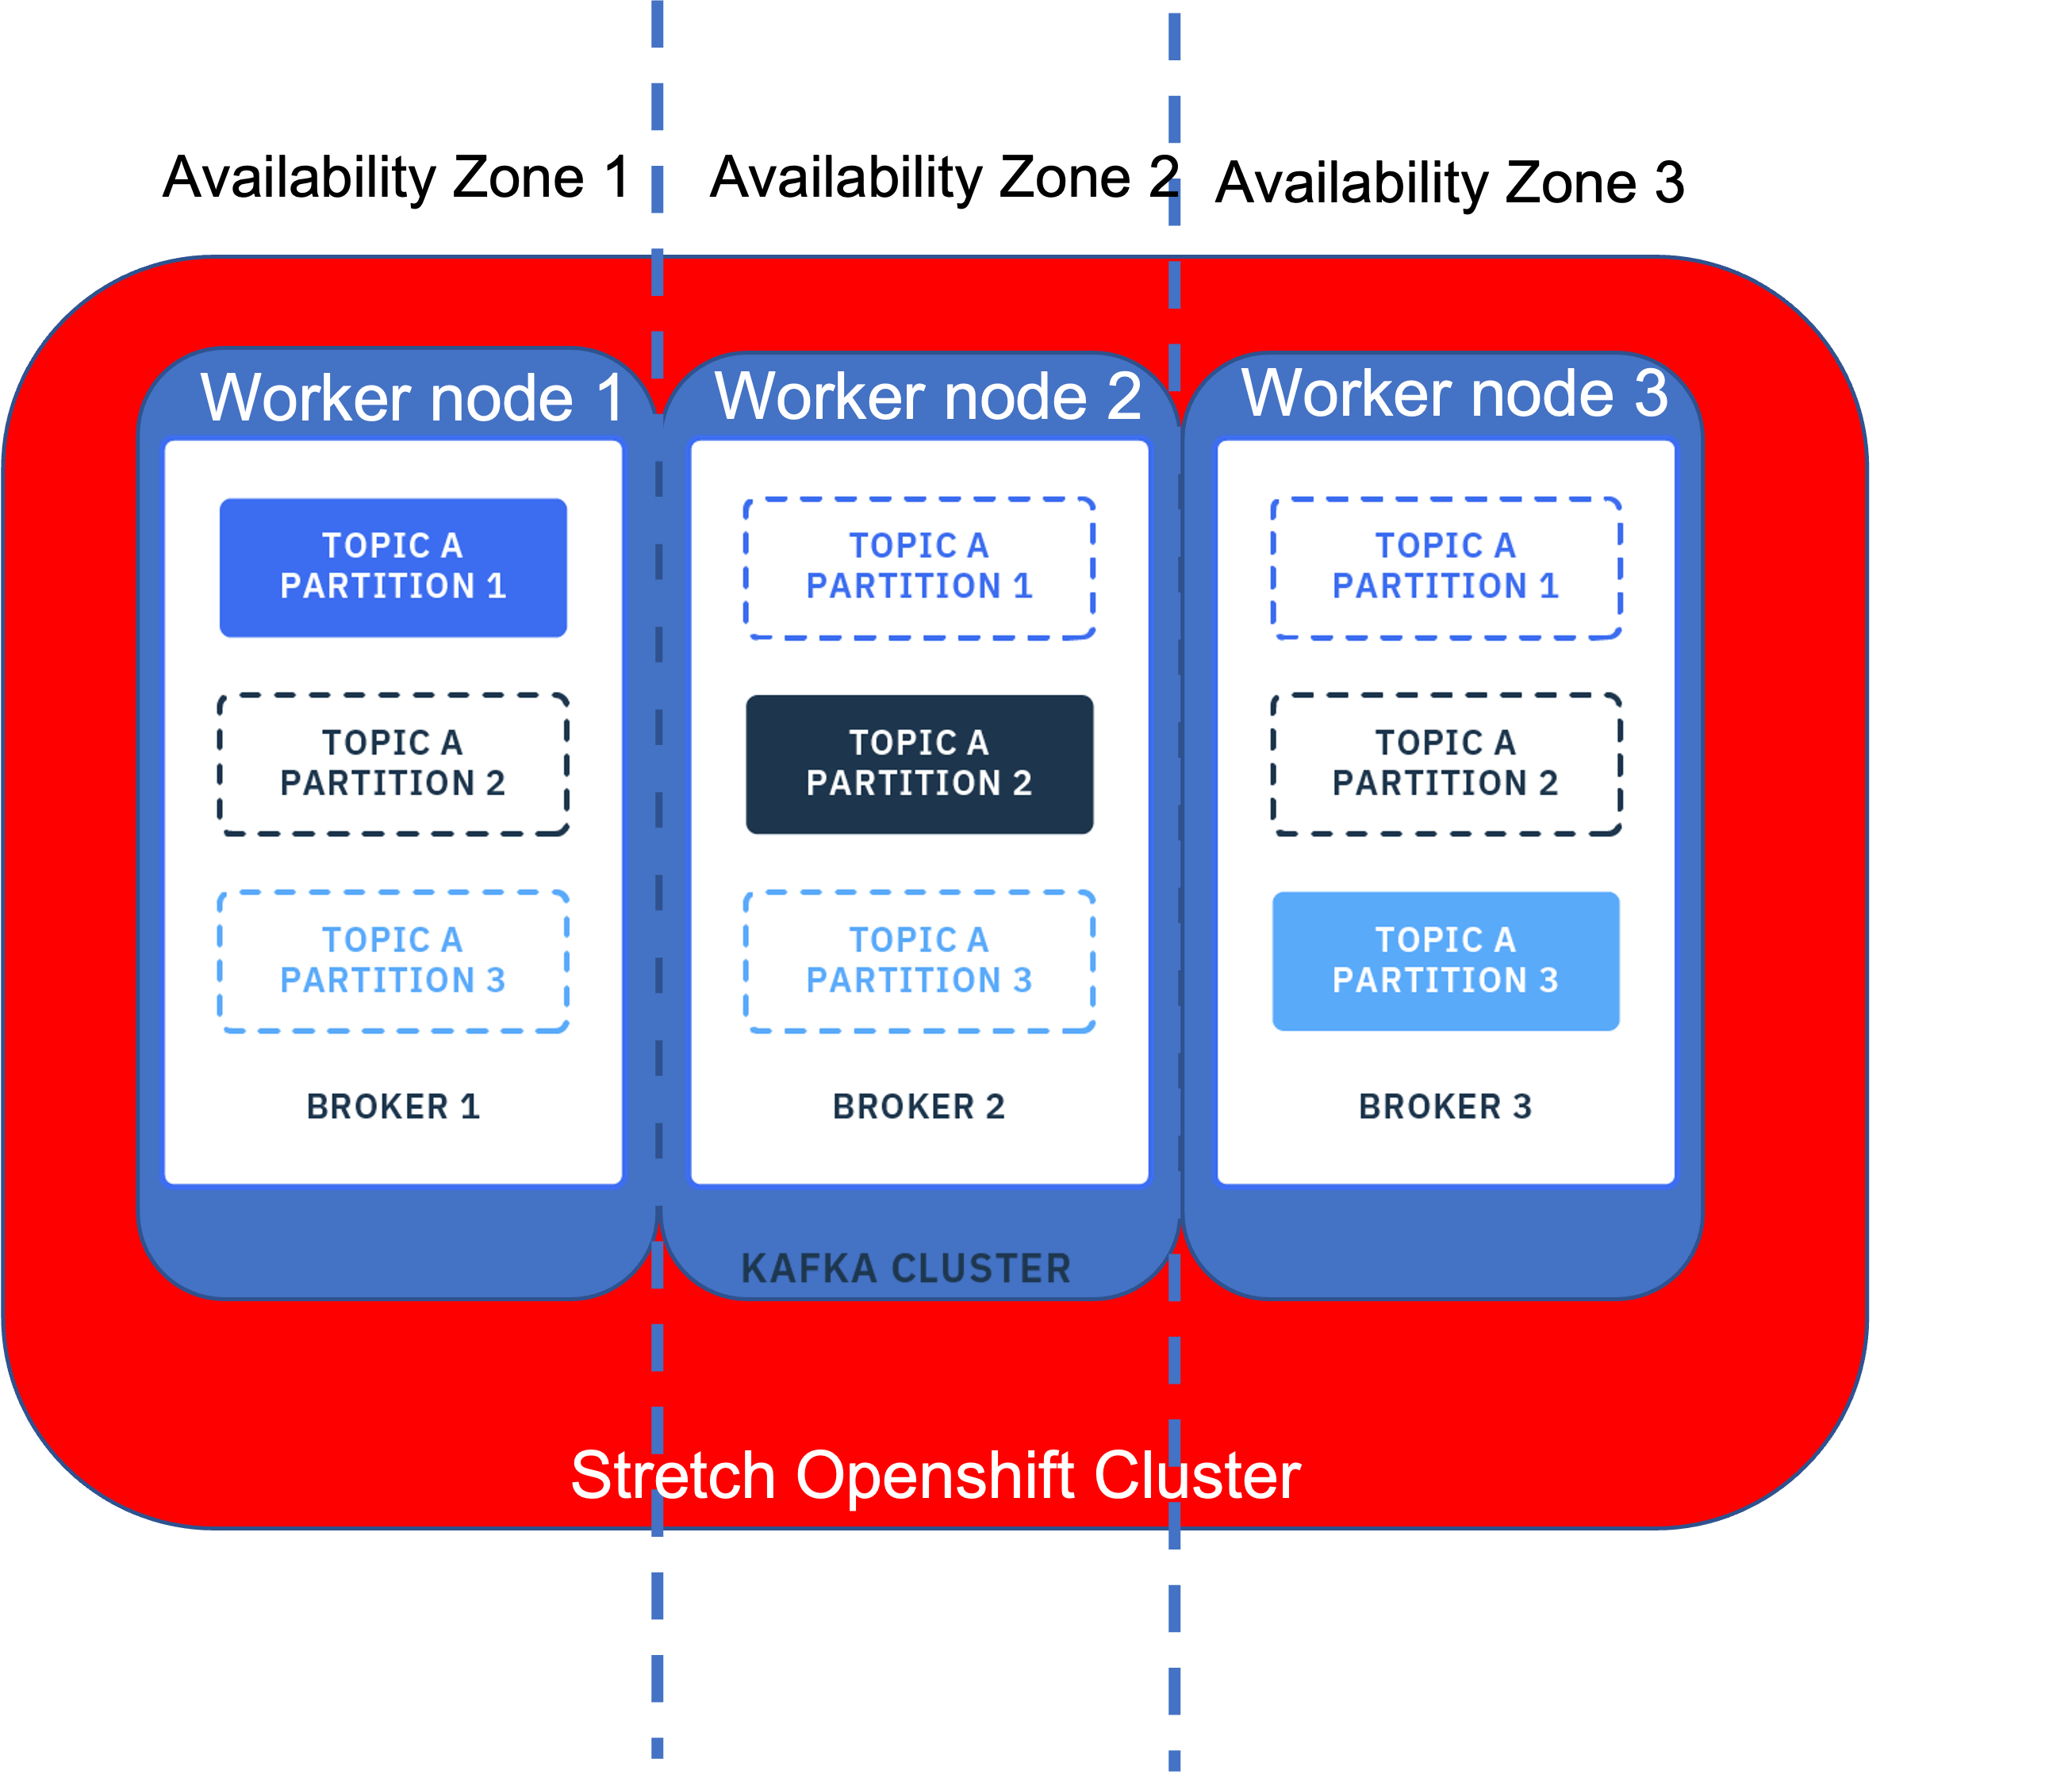 3 Kafka brokers on a stretch Openshift Cluster with 3 availability zones